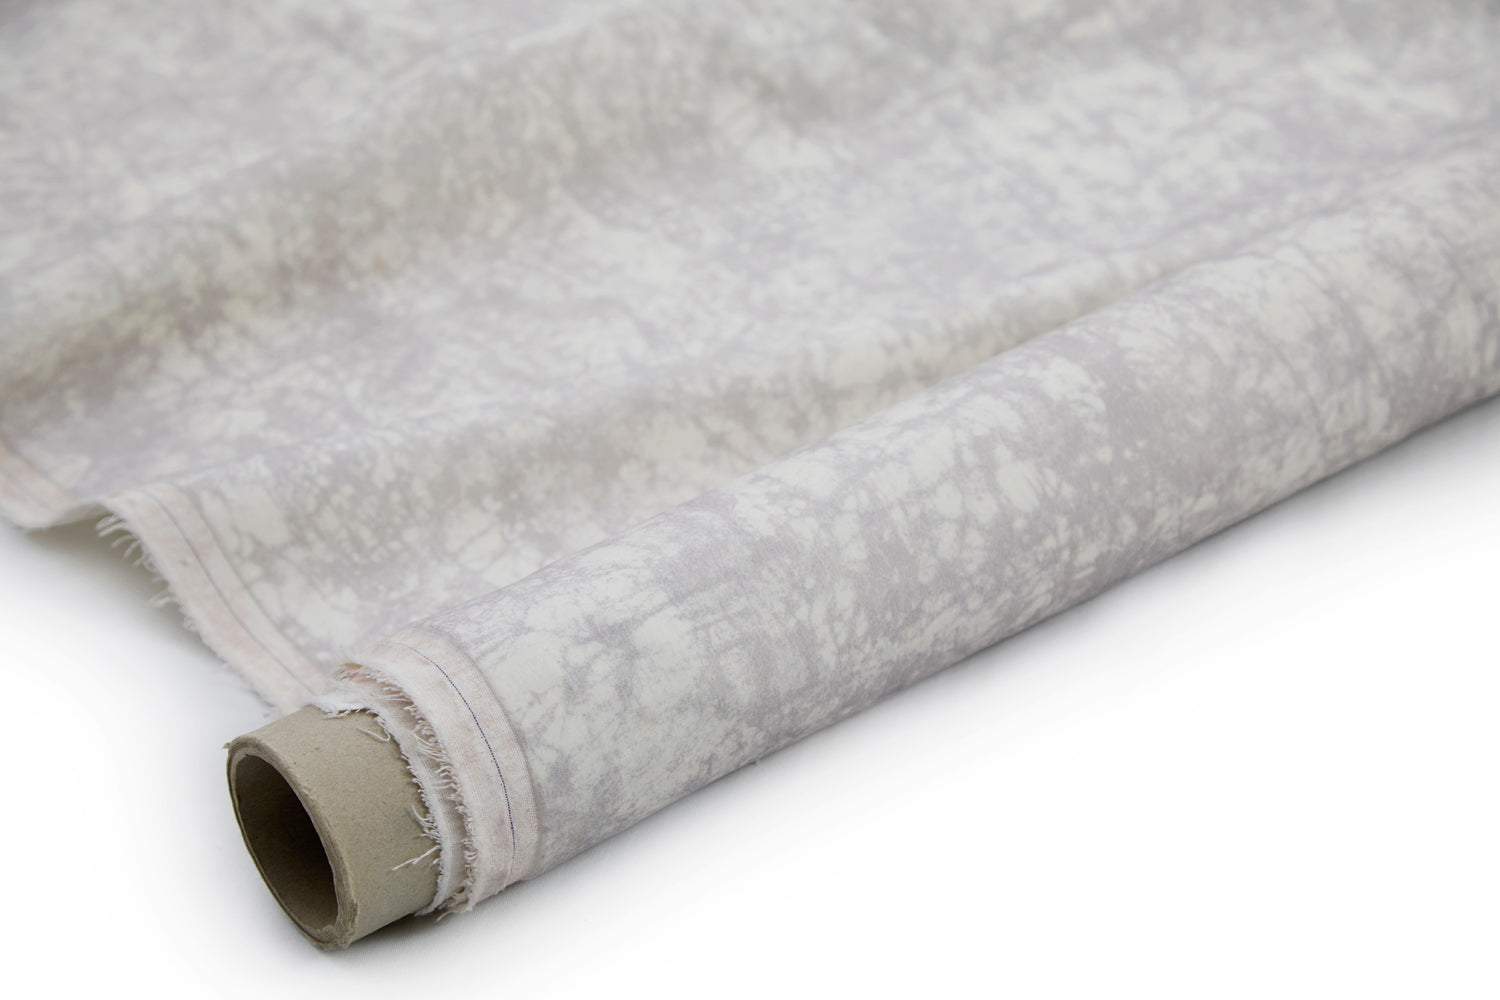 Partially unrolled fabric in an organic crumpled texture in light gray on a cream field.